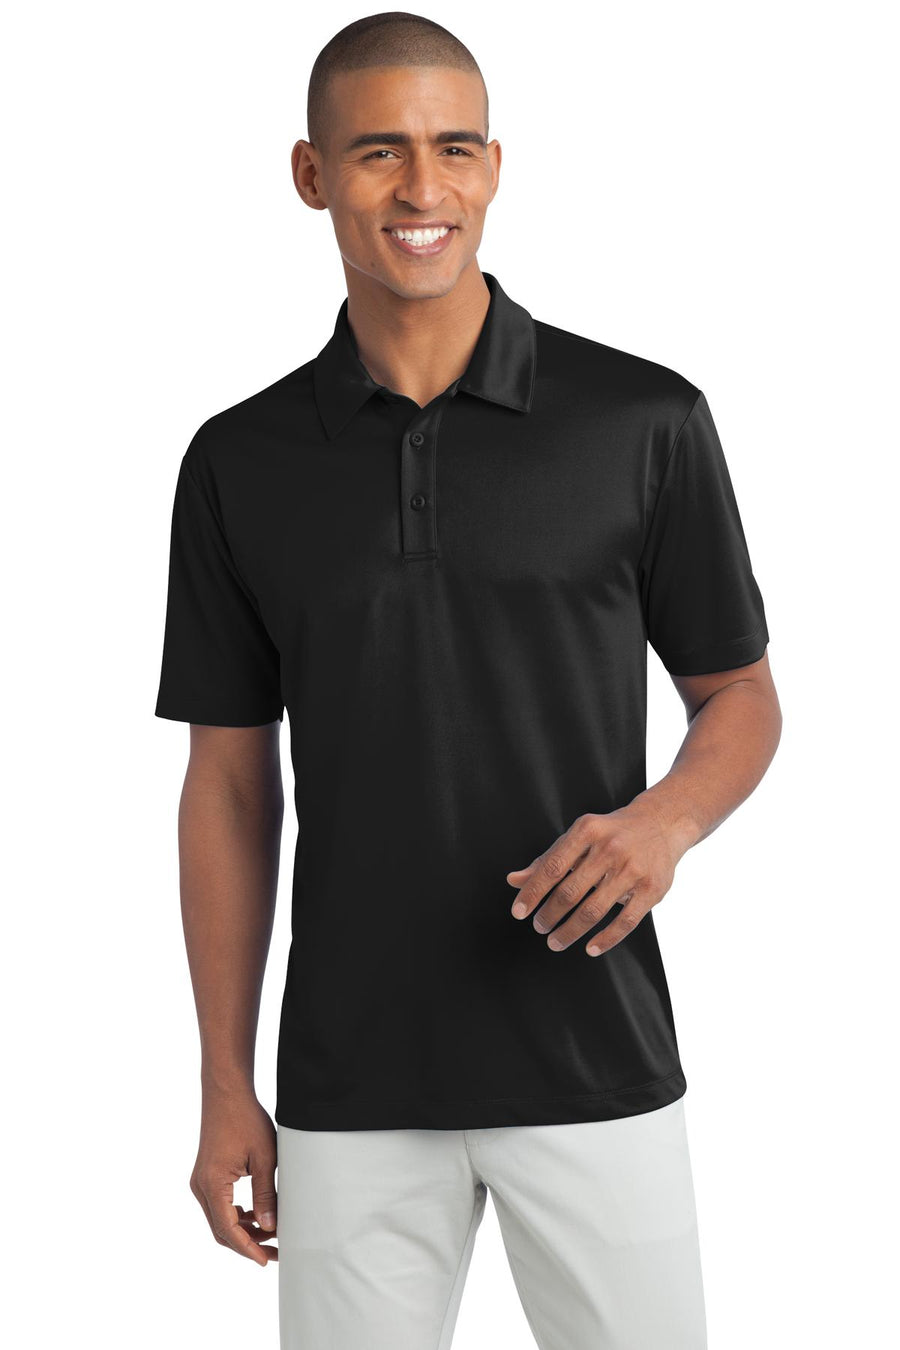 Port Authority Tall Silk Touch Performance Polo.